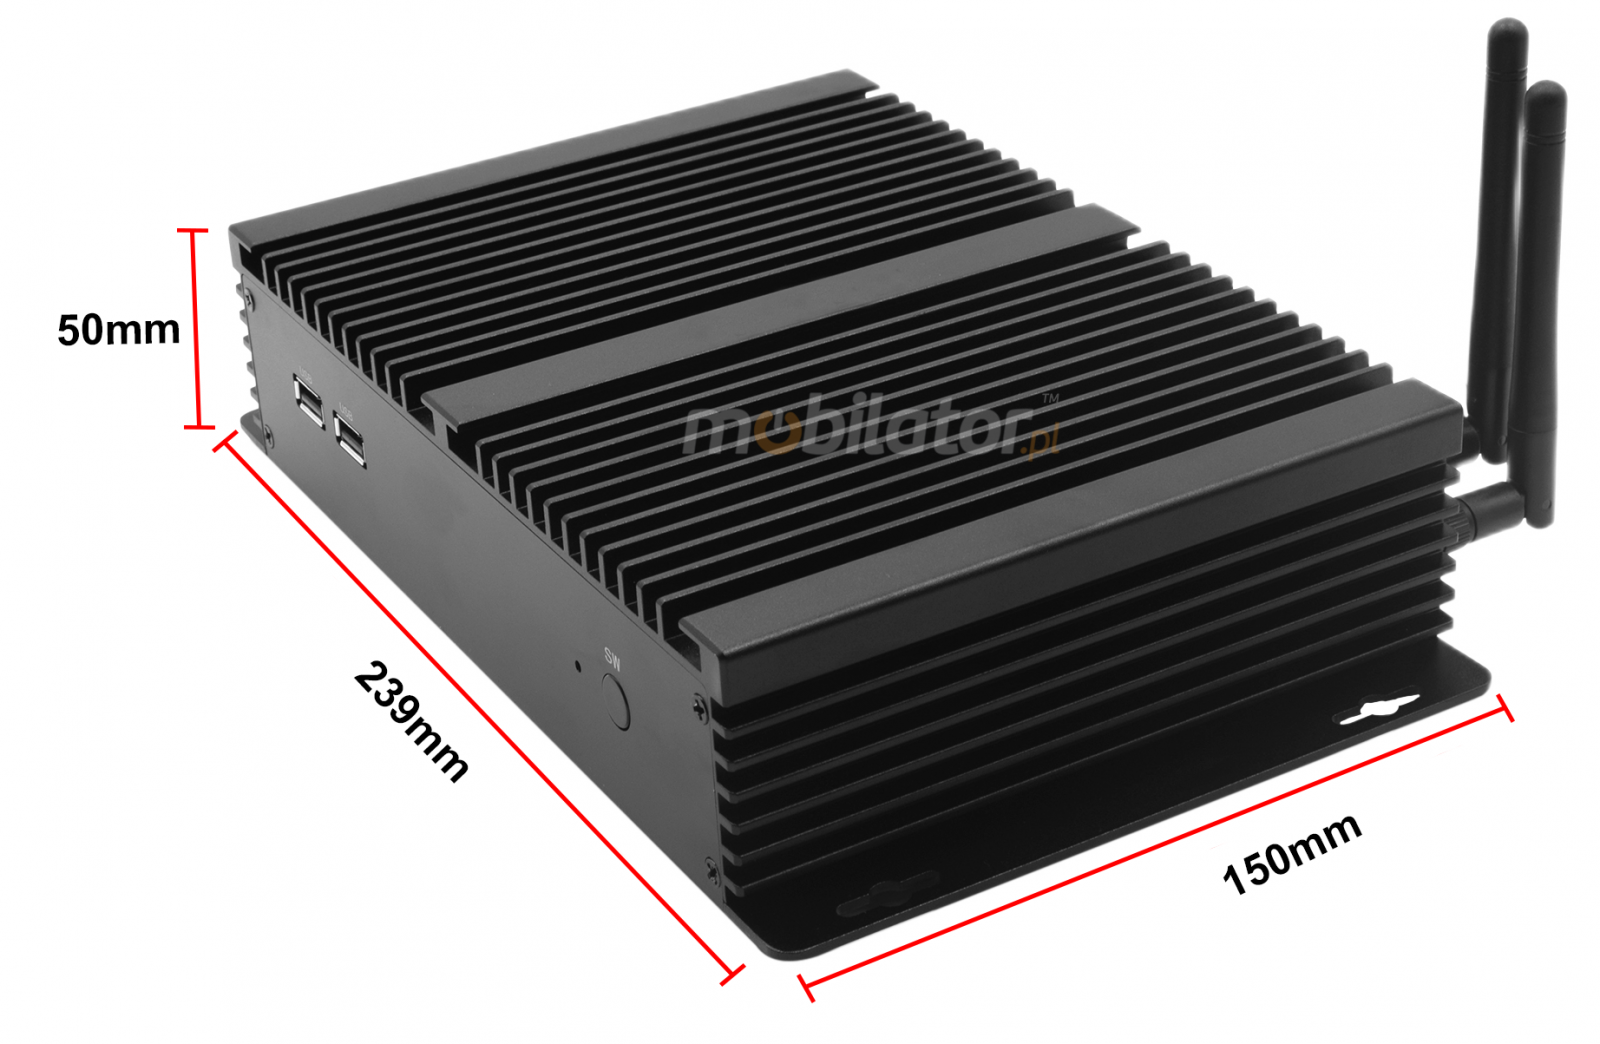 HyBOX K4 efficient, fast and reliable mini pc with small dimensions